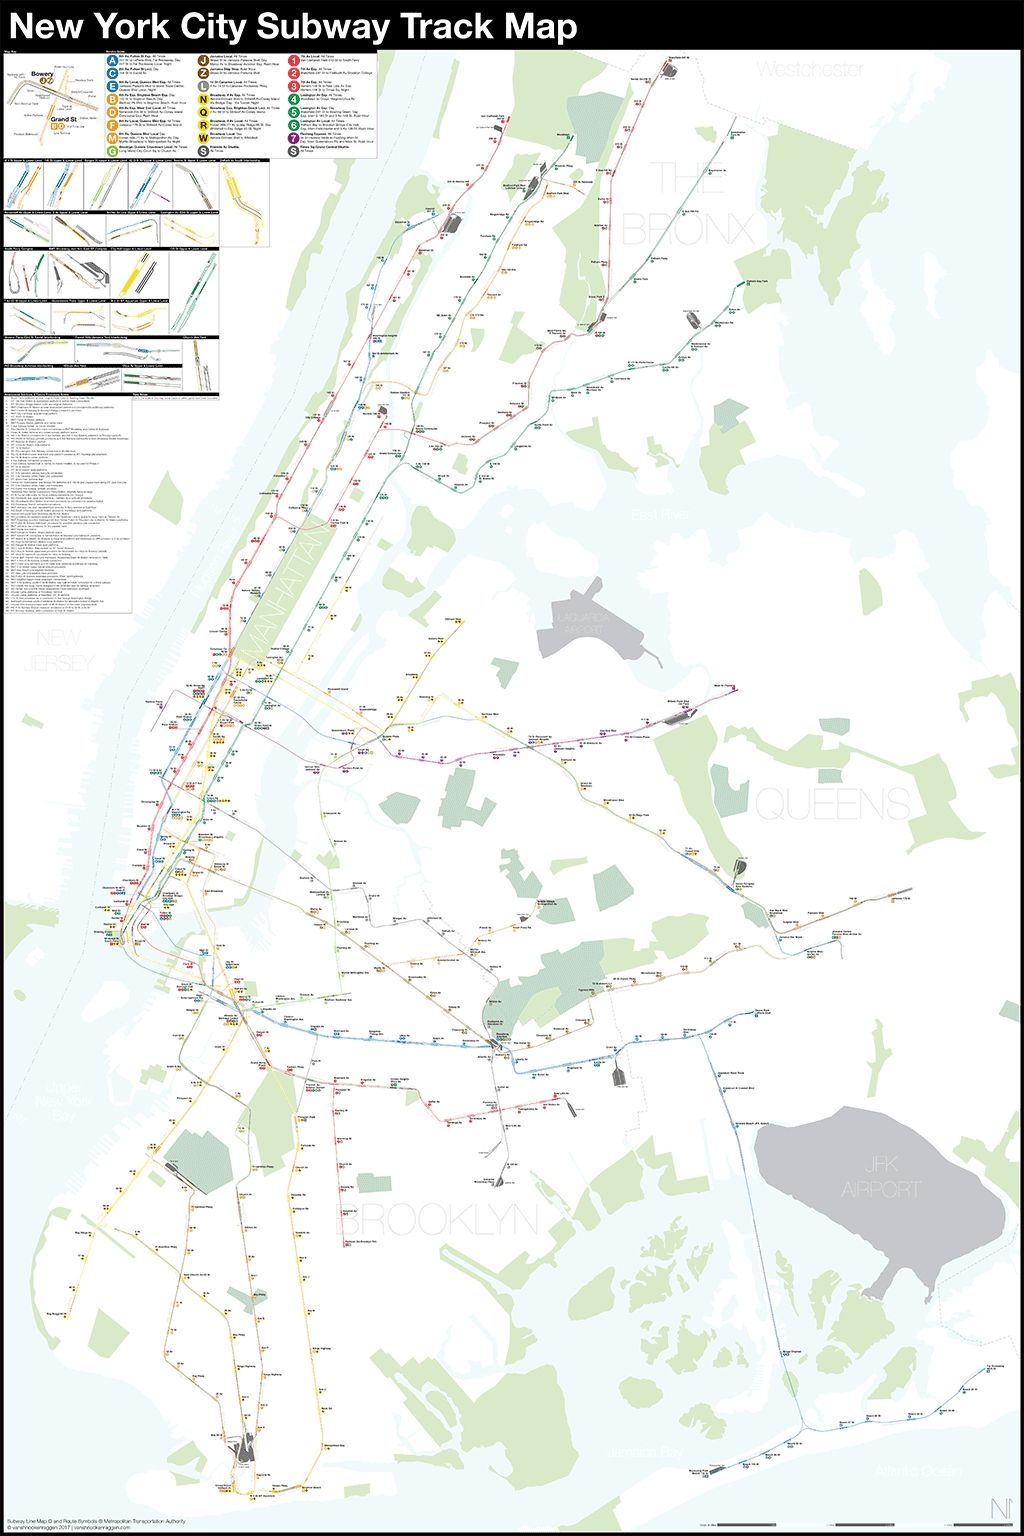 A Complete And Geographically Accurate Nyc Subway Track Map Intended For New York Subway Map Wall Art (View 12 of 20)